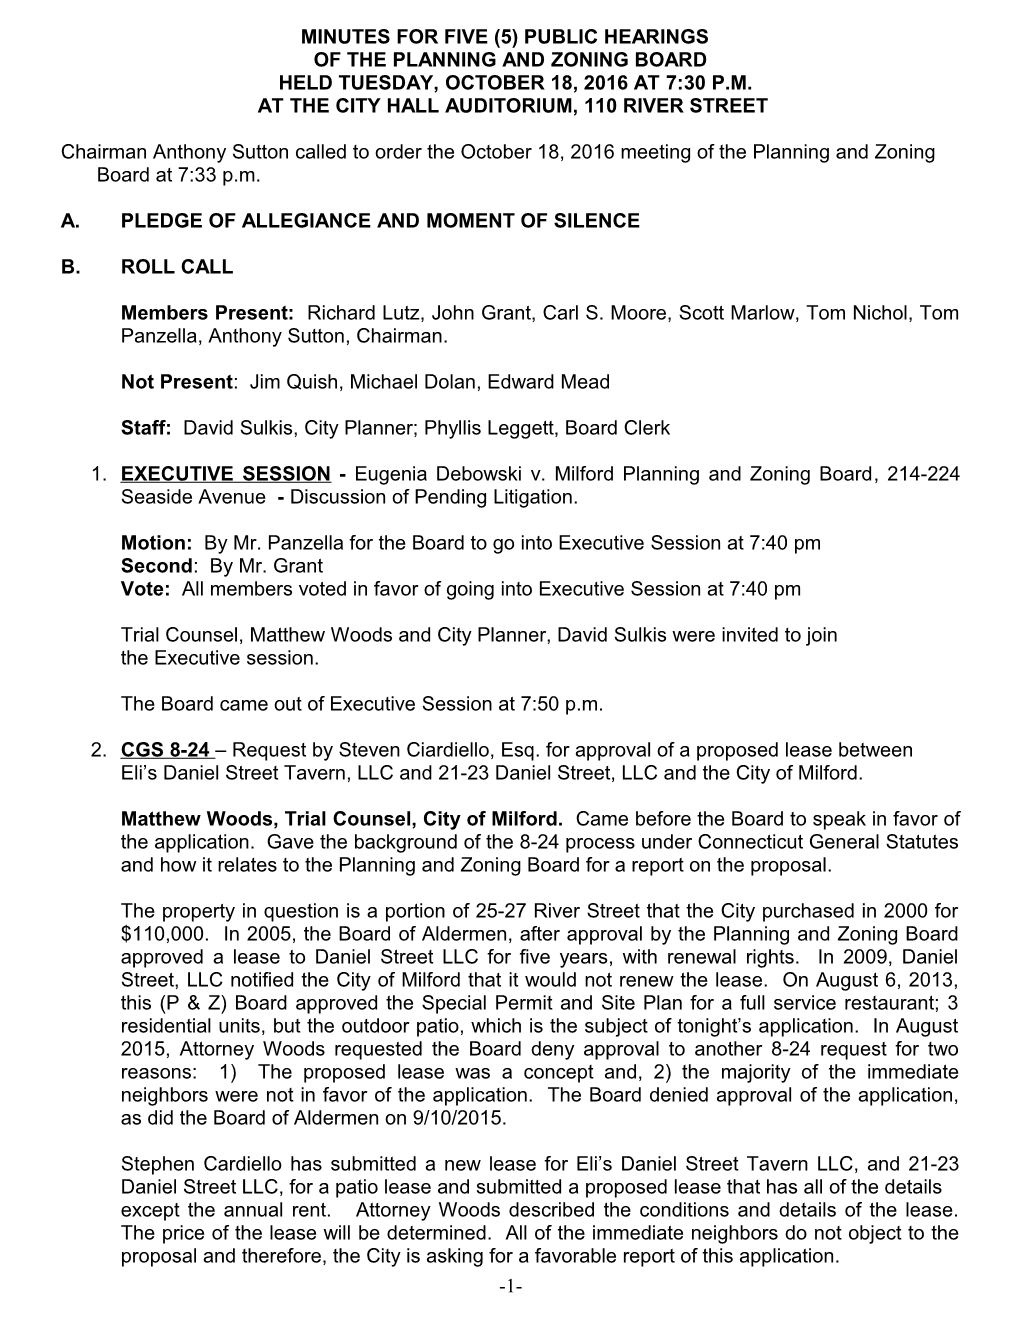 Minutes for Five (5) Public Hearings